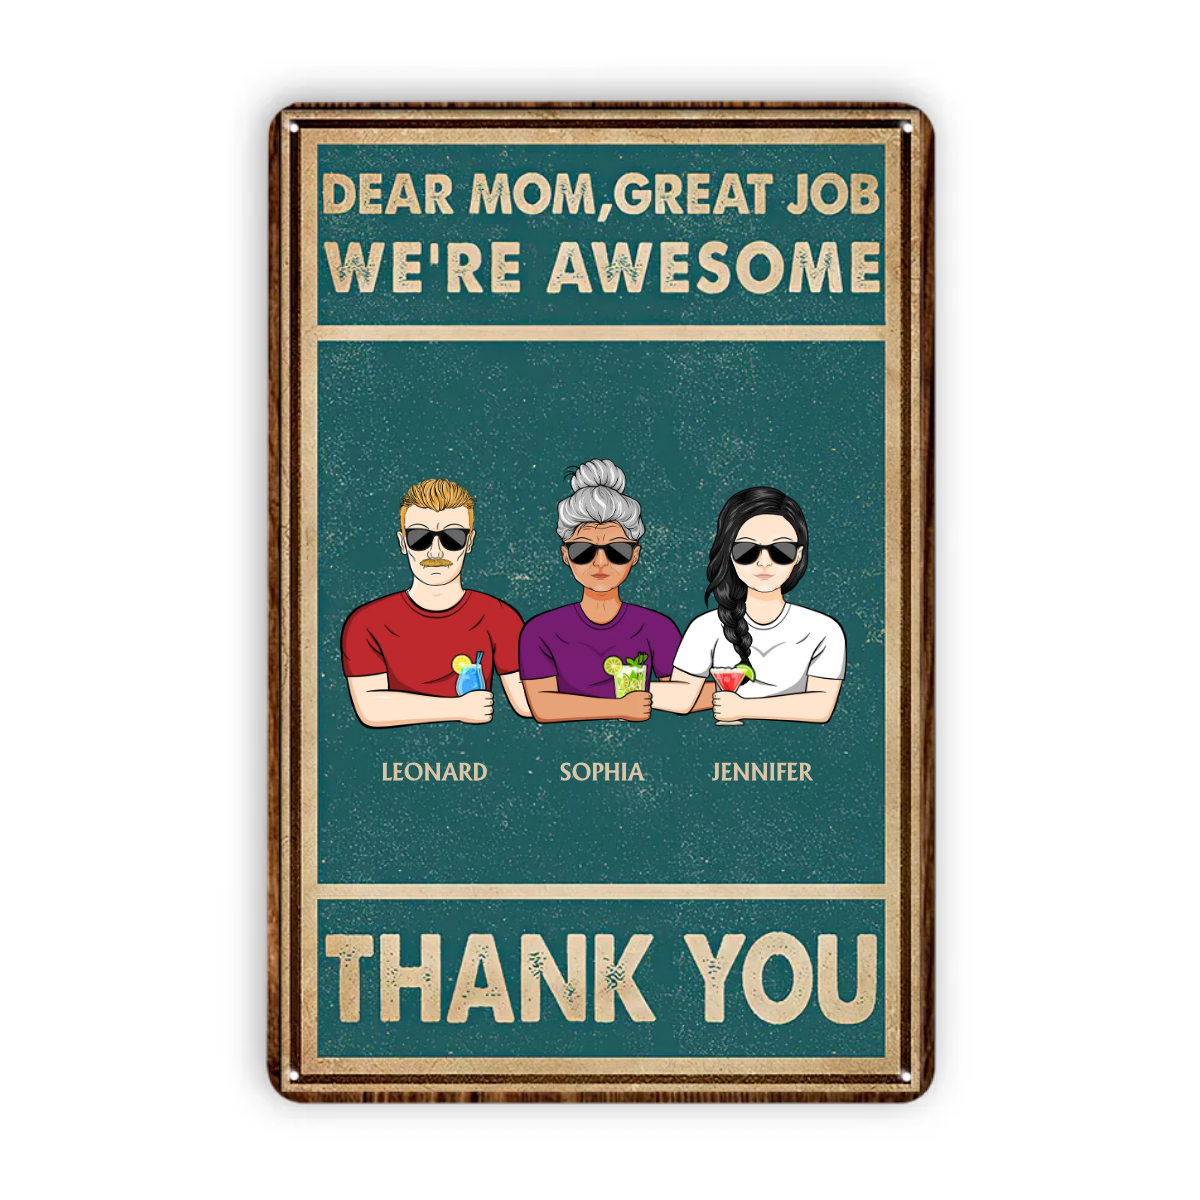 Dear Mom Great Job I'm Awesome Thank You - Mother Gift - Personalized Custom Metal Signs